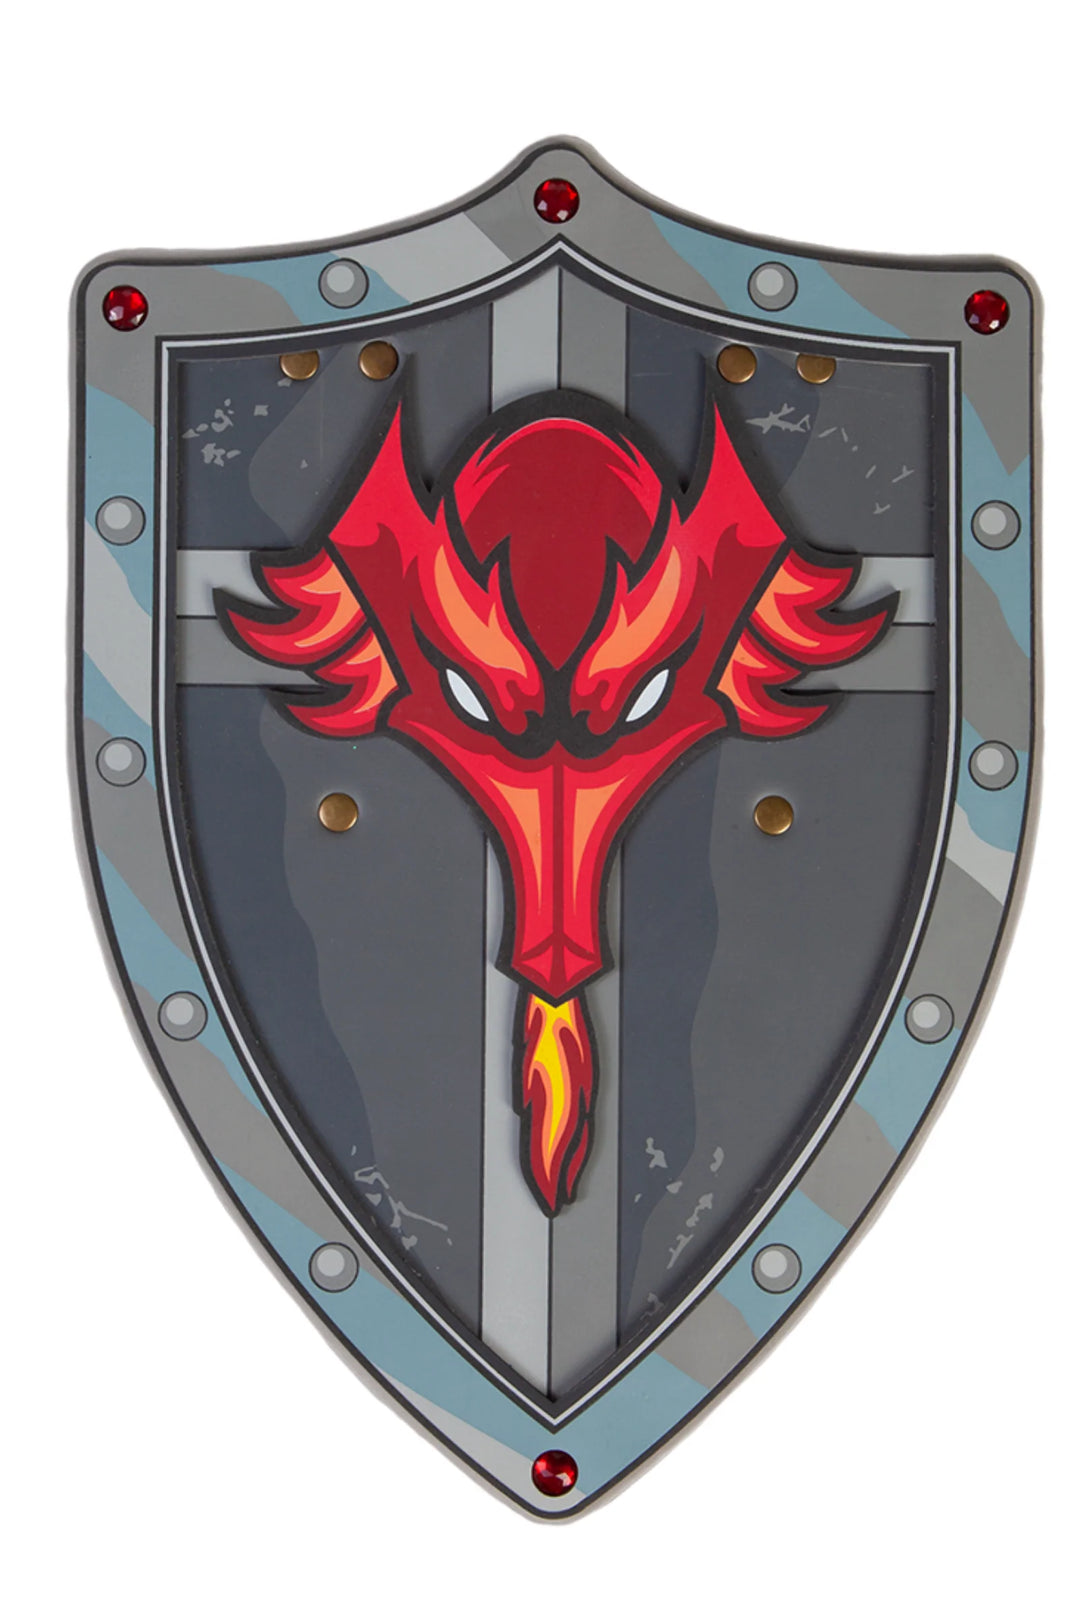 front view of shield- grey background with red fire breathing dragon